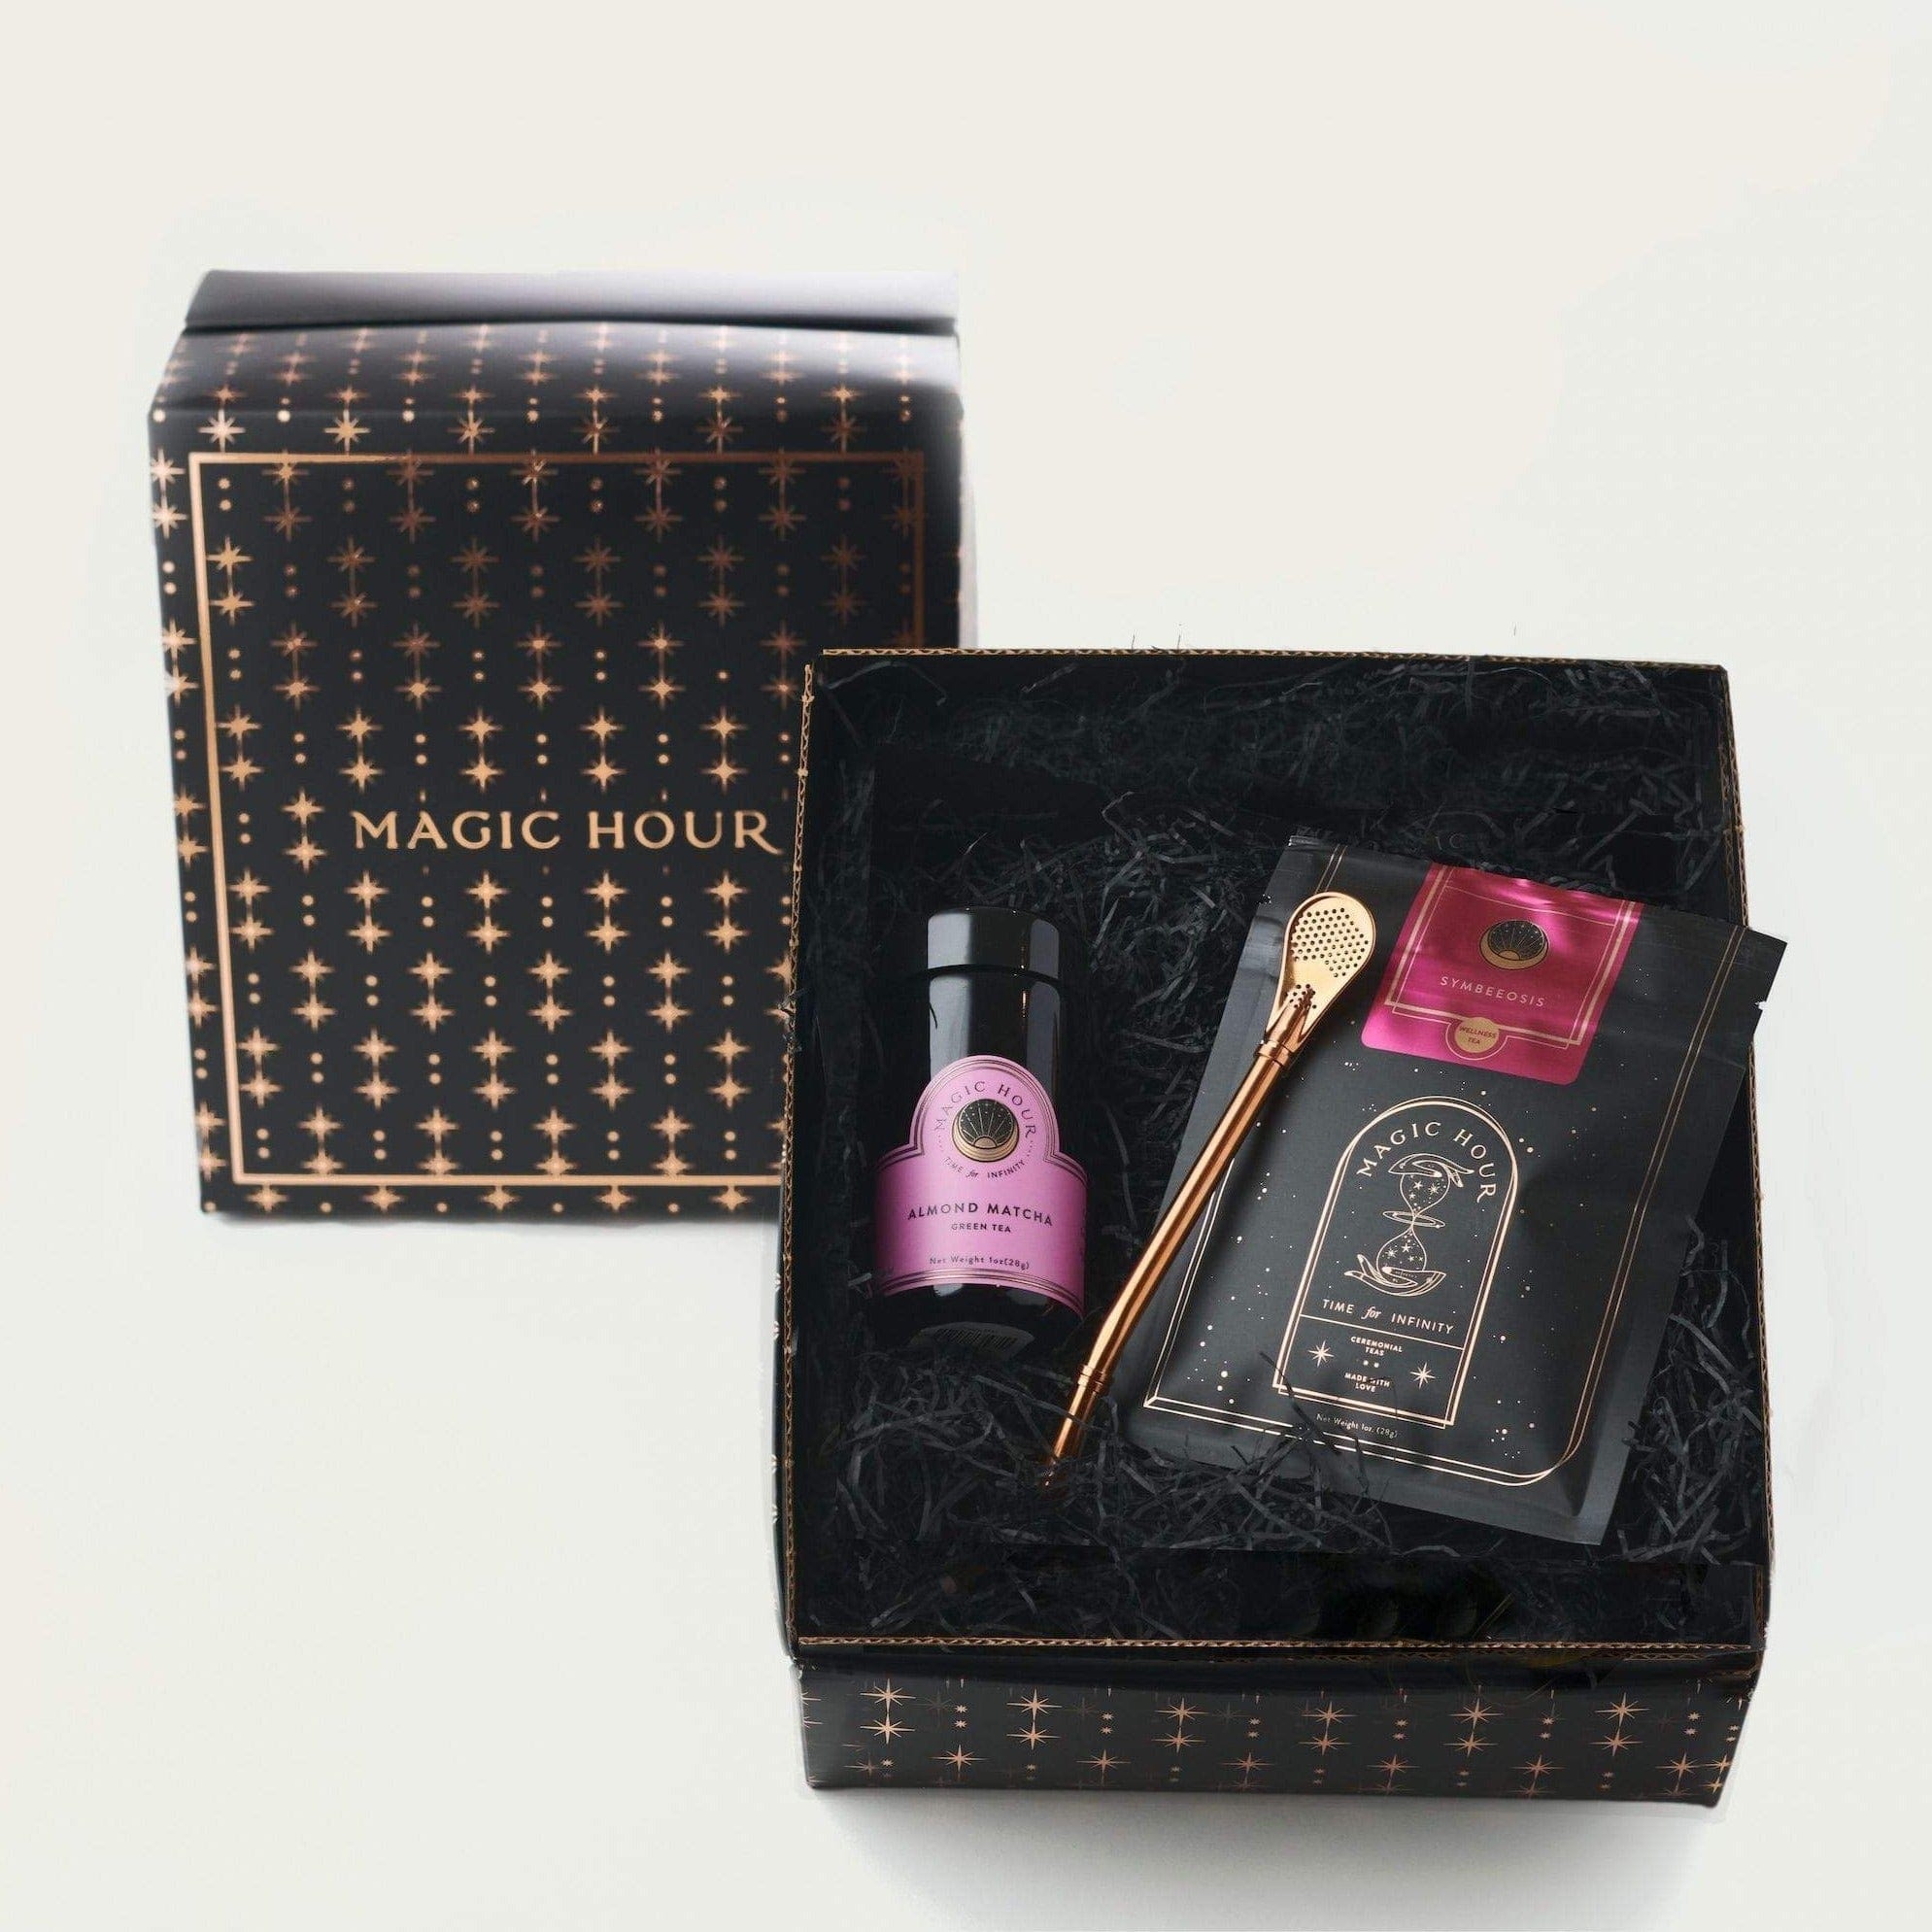 A luxury gift box labeled "Magic Hour Sip Wellness: Ritual Kit for Immunity & Joy" with a constellation design. Inside is a bottle with a pink label, a golden stirring spoon, a packet of organic tea, and a booklet. The box has black shredded paper as padding. The lid is placed leaning against the box.